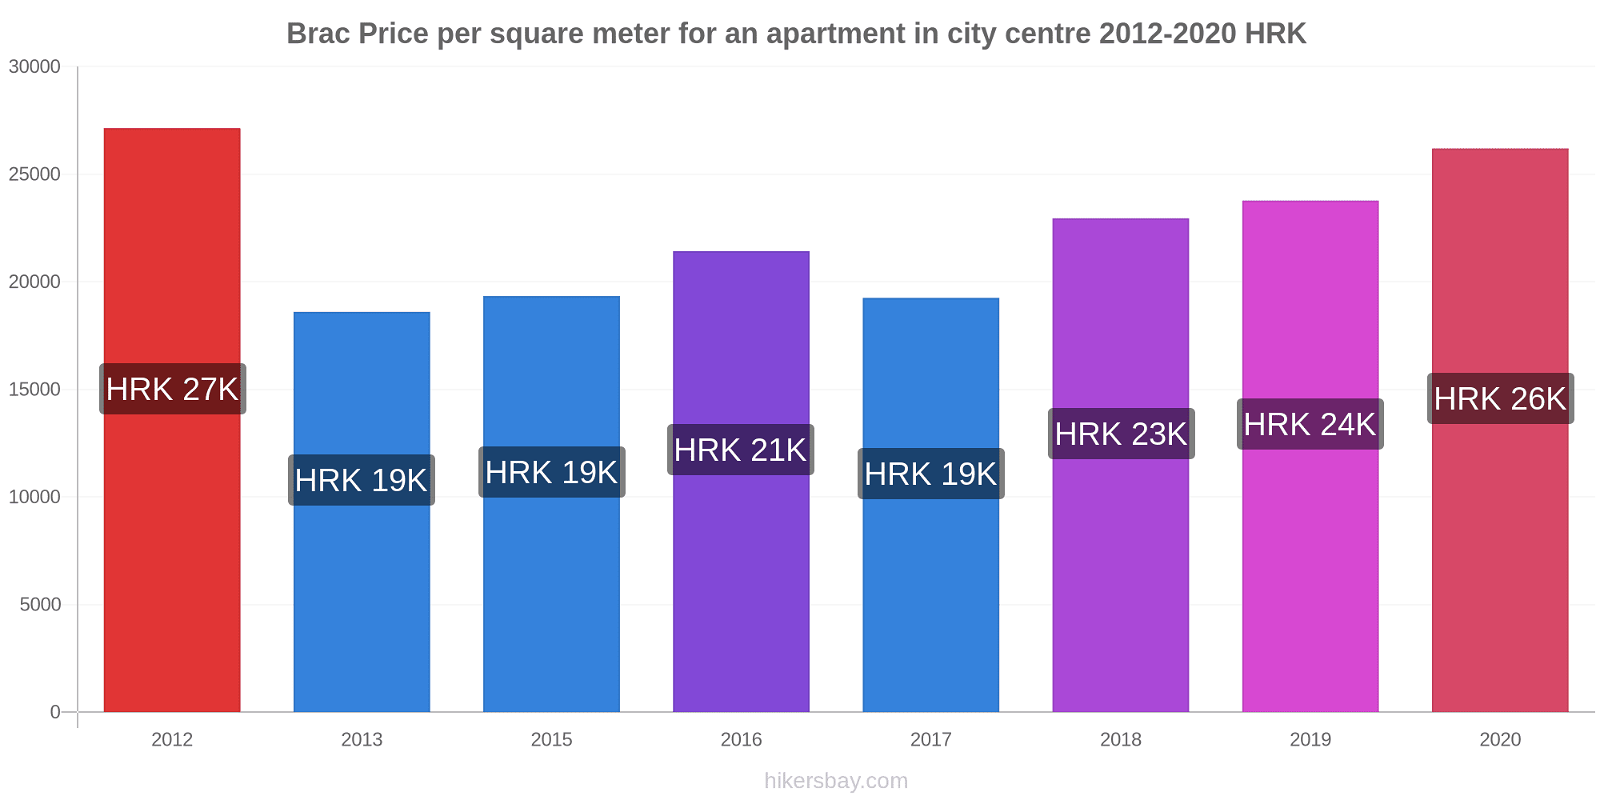 Brac price changes Price per square meter for an apartment in city centre hikersbay.com